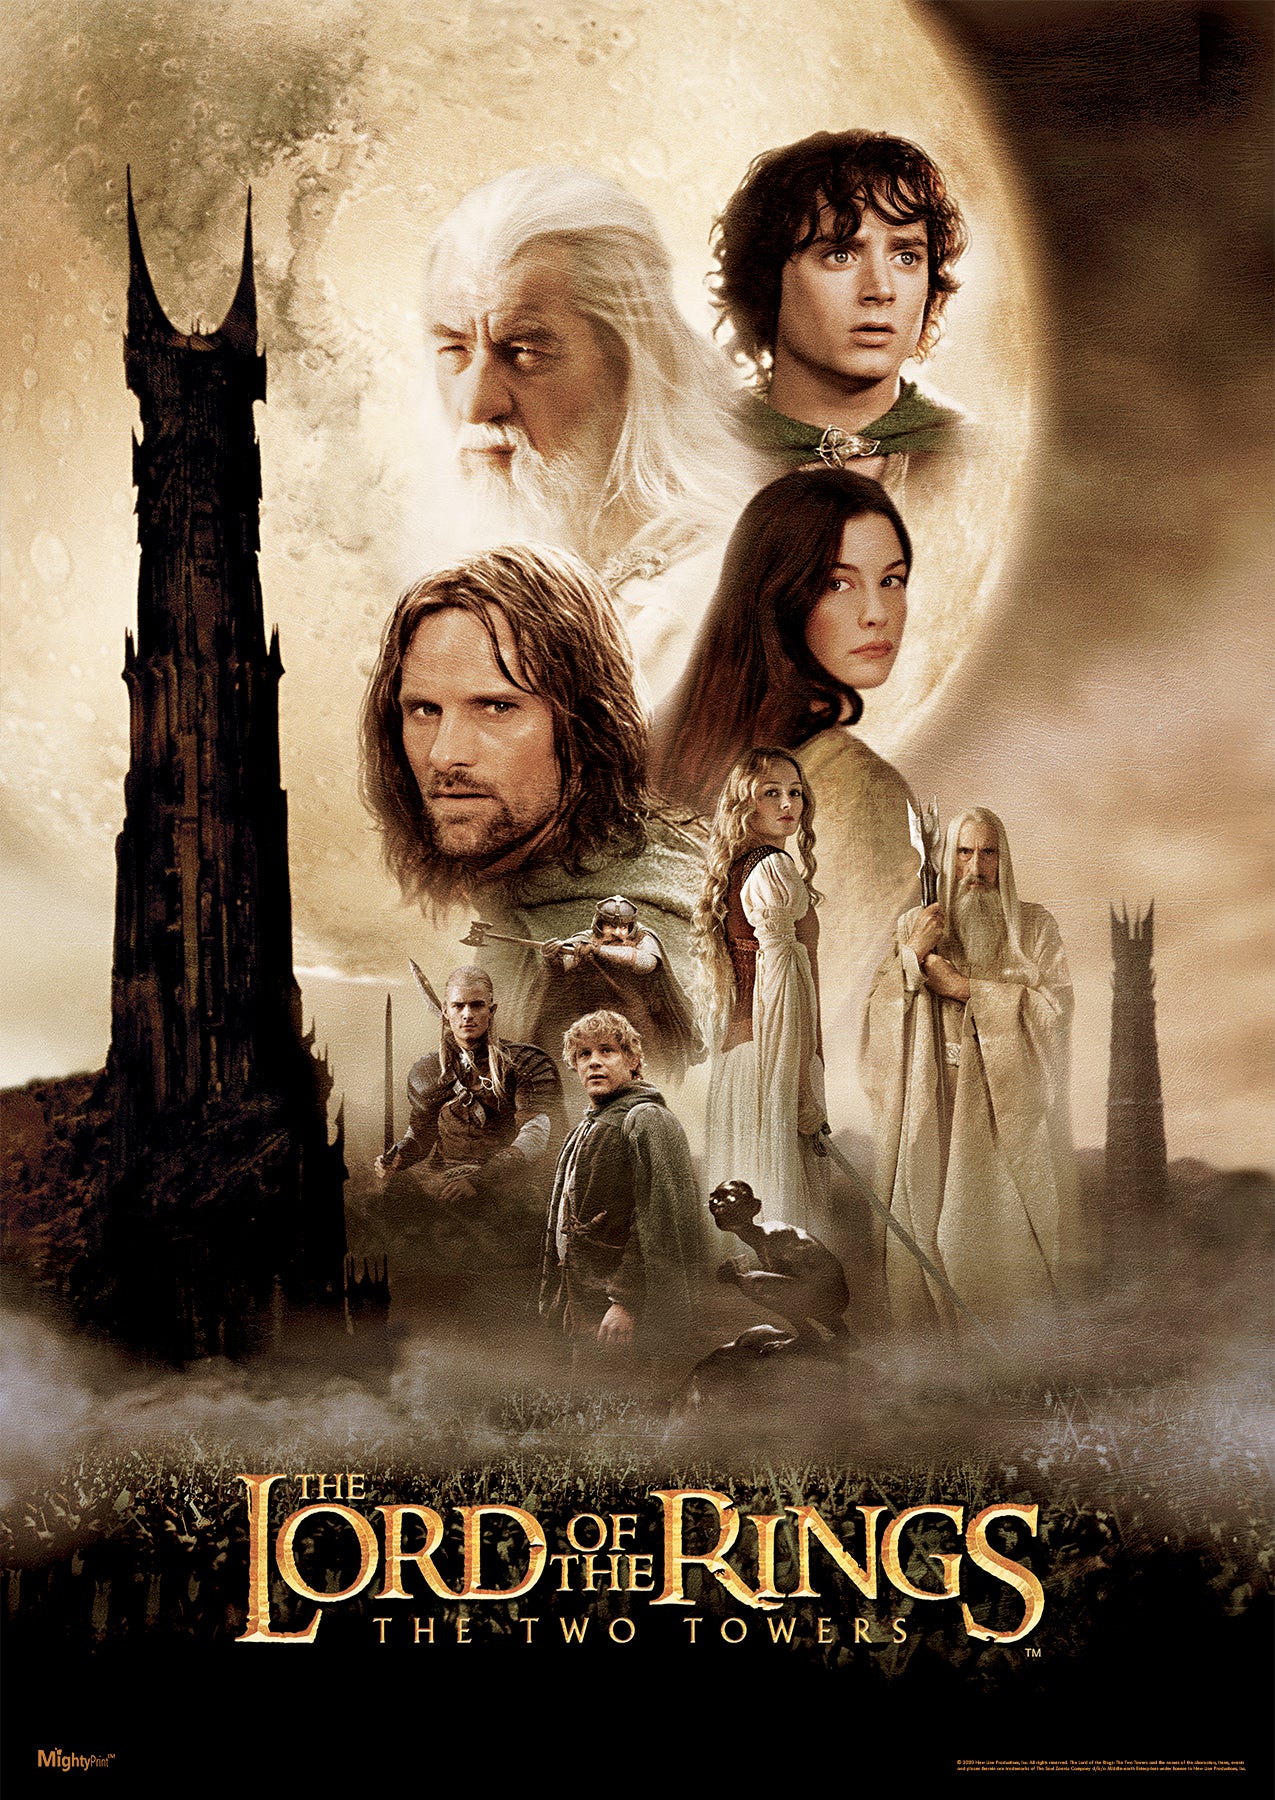 The Lord of the Rings Trilogy (The Two Towers) MightyPrint™ Wall Art MP17240608